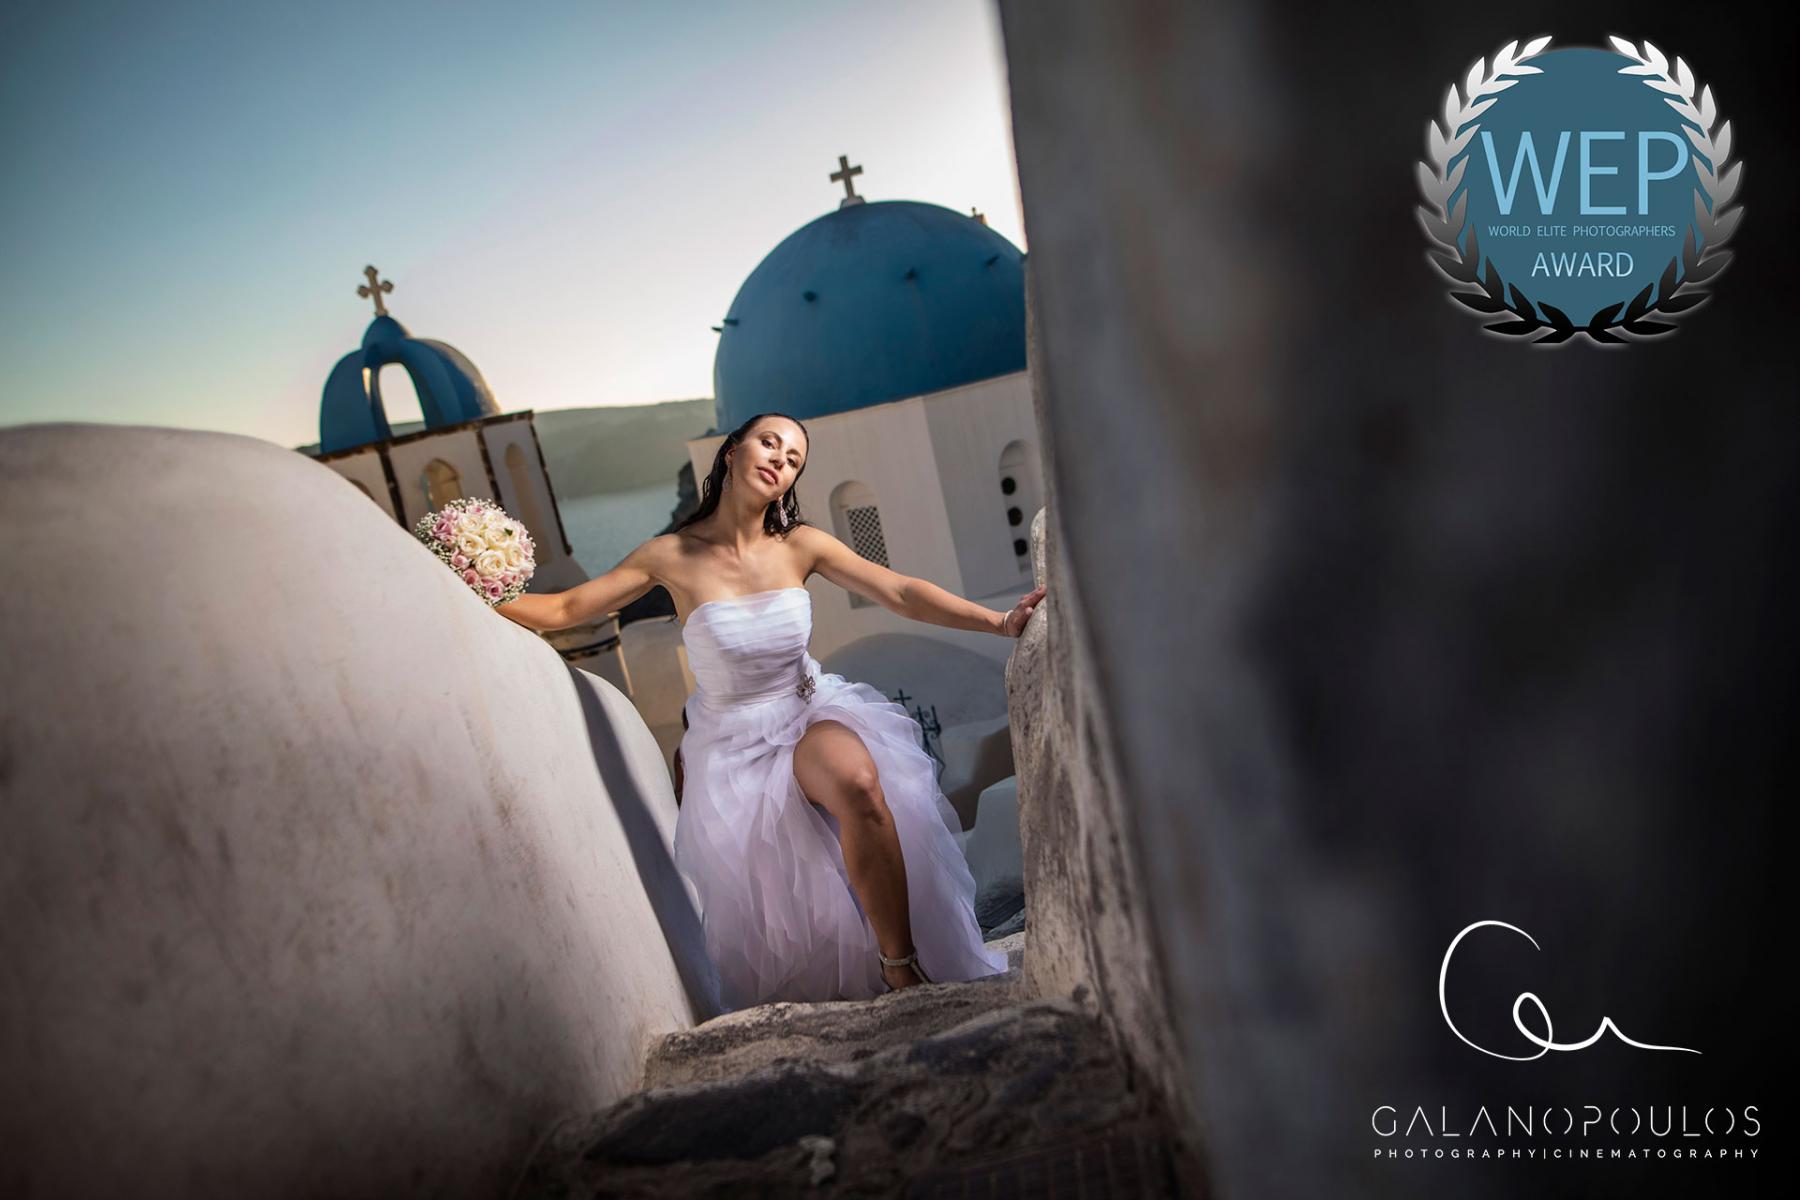 Artistic Guild Awards of the Wedding Photojournalist Association